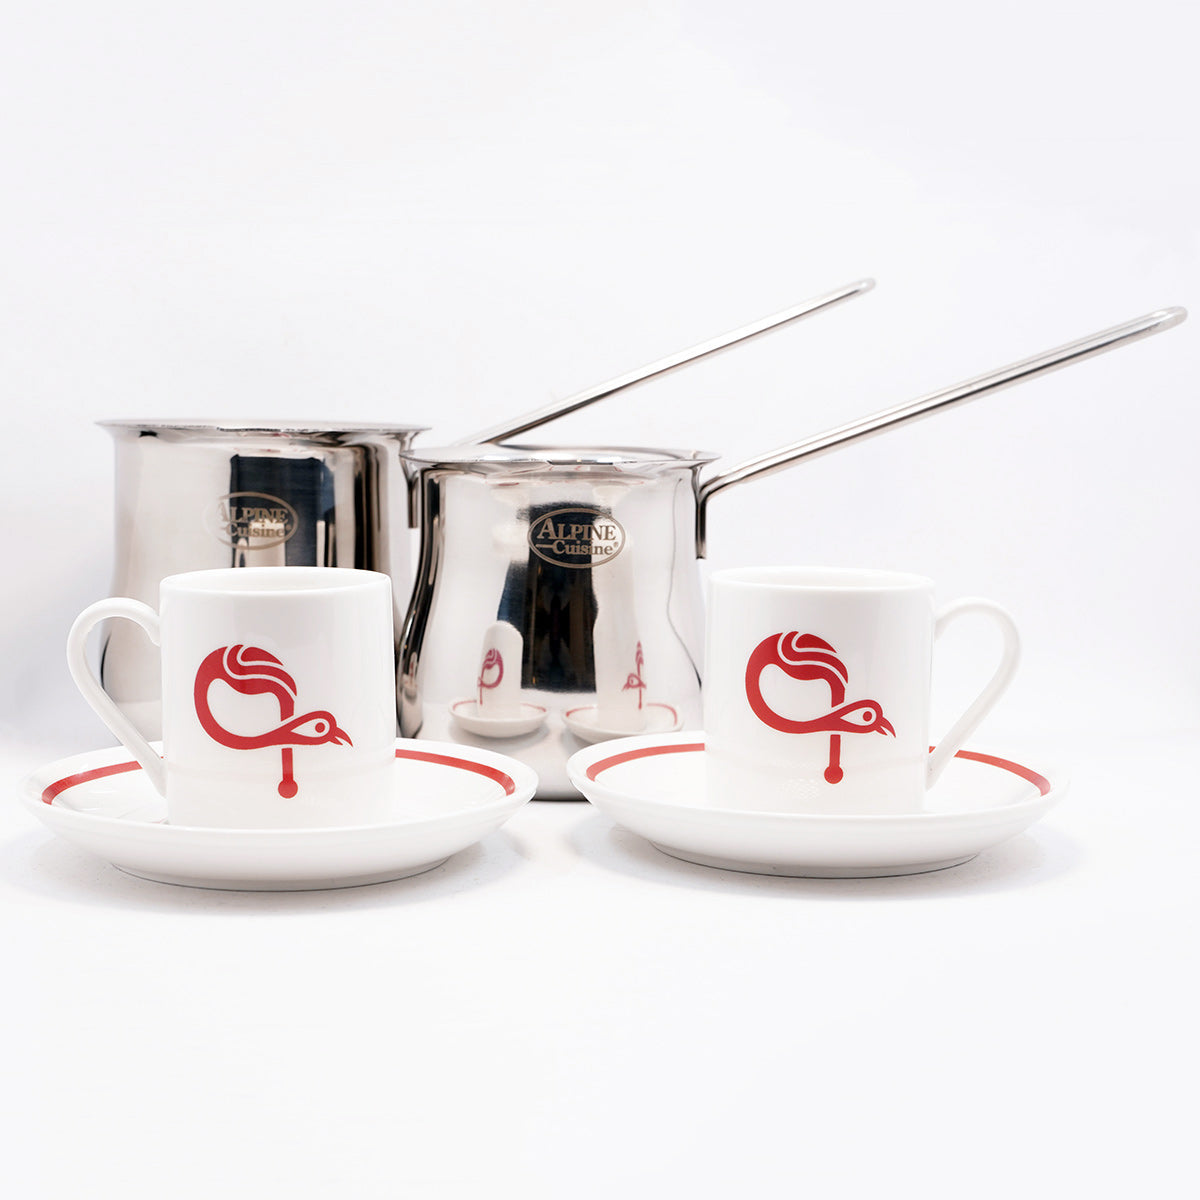 Signature ԳAVAT Coffee Cup & Saucer Set W/ Stainless Steel Coffee Pot -  kavatcoffee